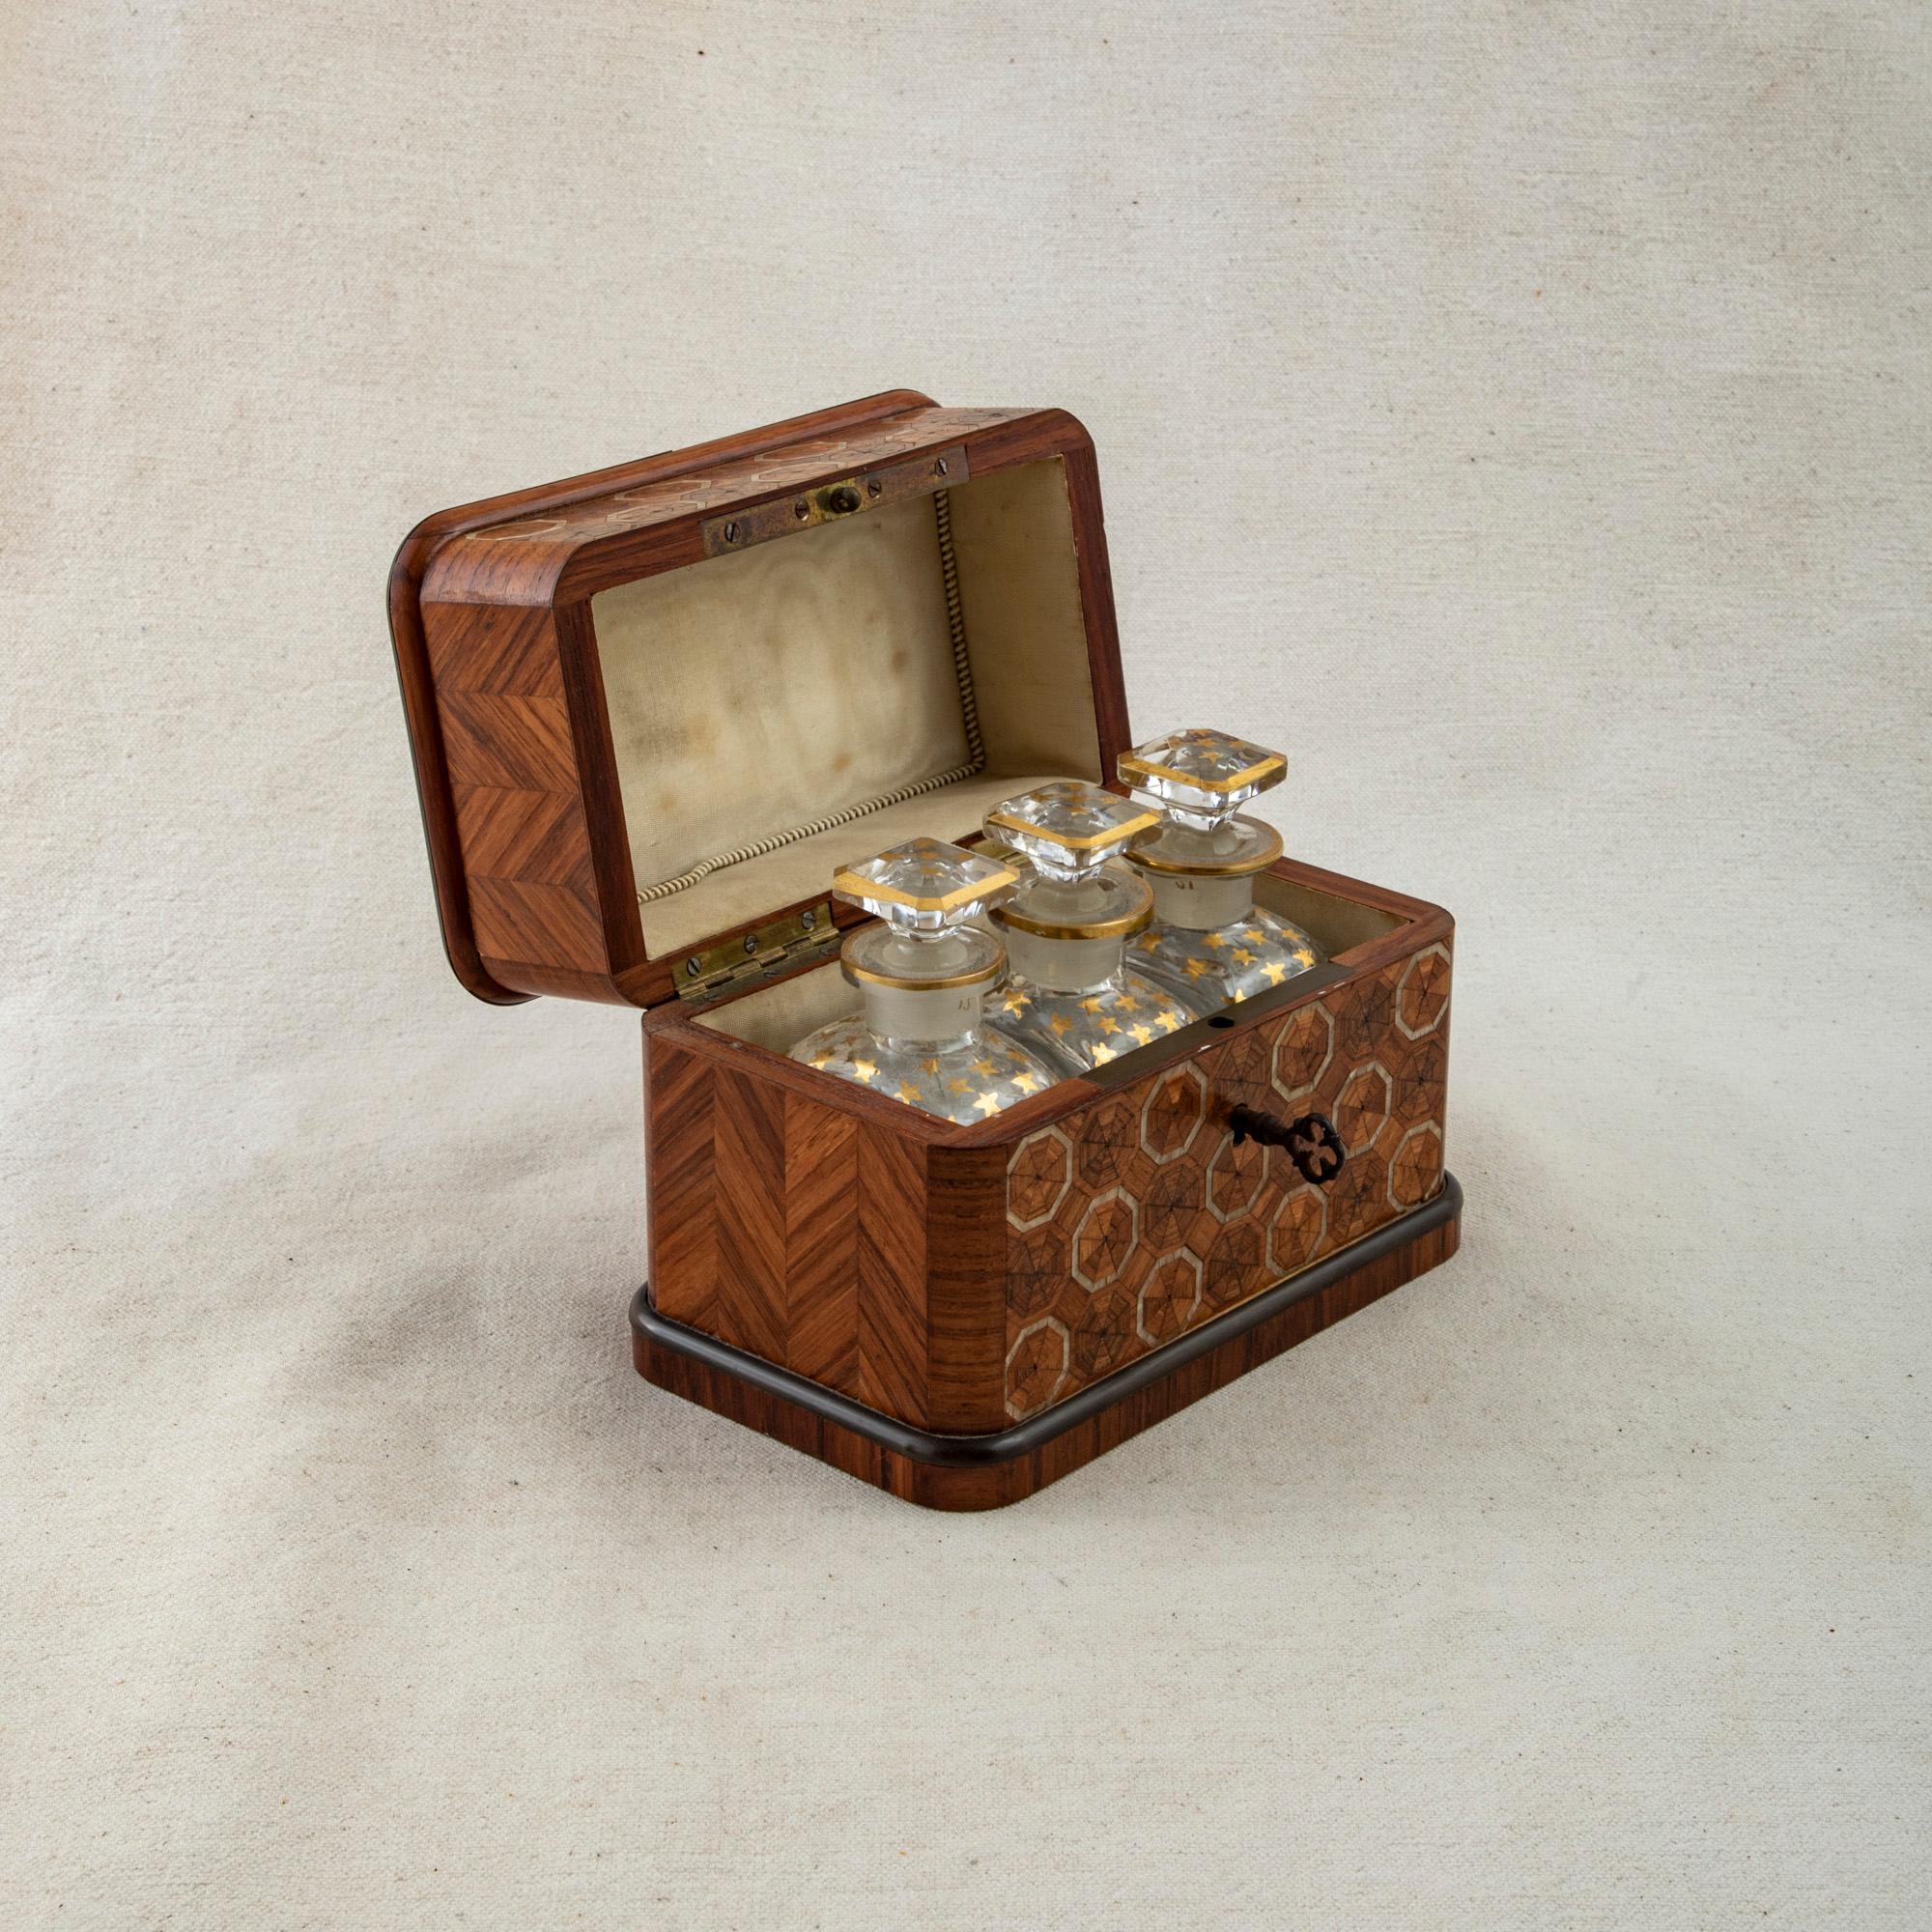 This mid-nineteenth century French Napoleon III period rosewood marquetry perfumer's box features mother-of-pearl inlay that creates a geometric octagonal pattern on the top and front. The sides of the box are detailed with a chevron pattern in